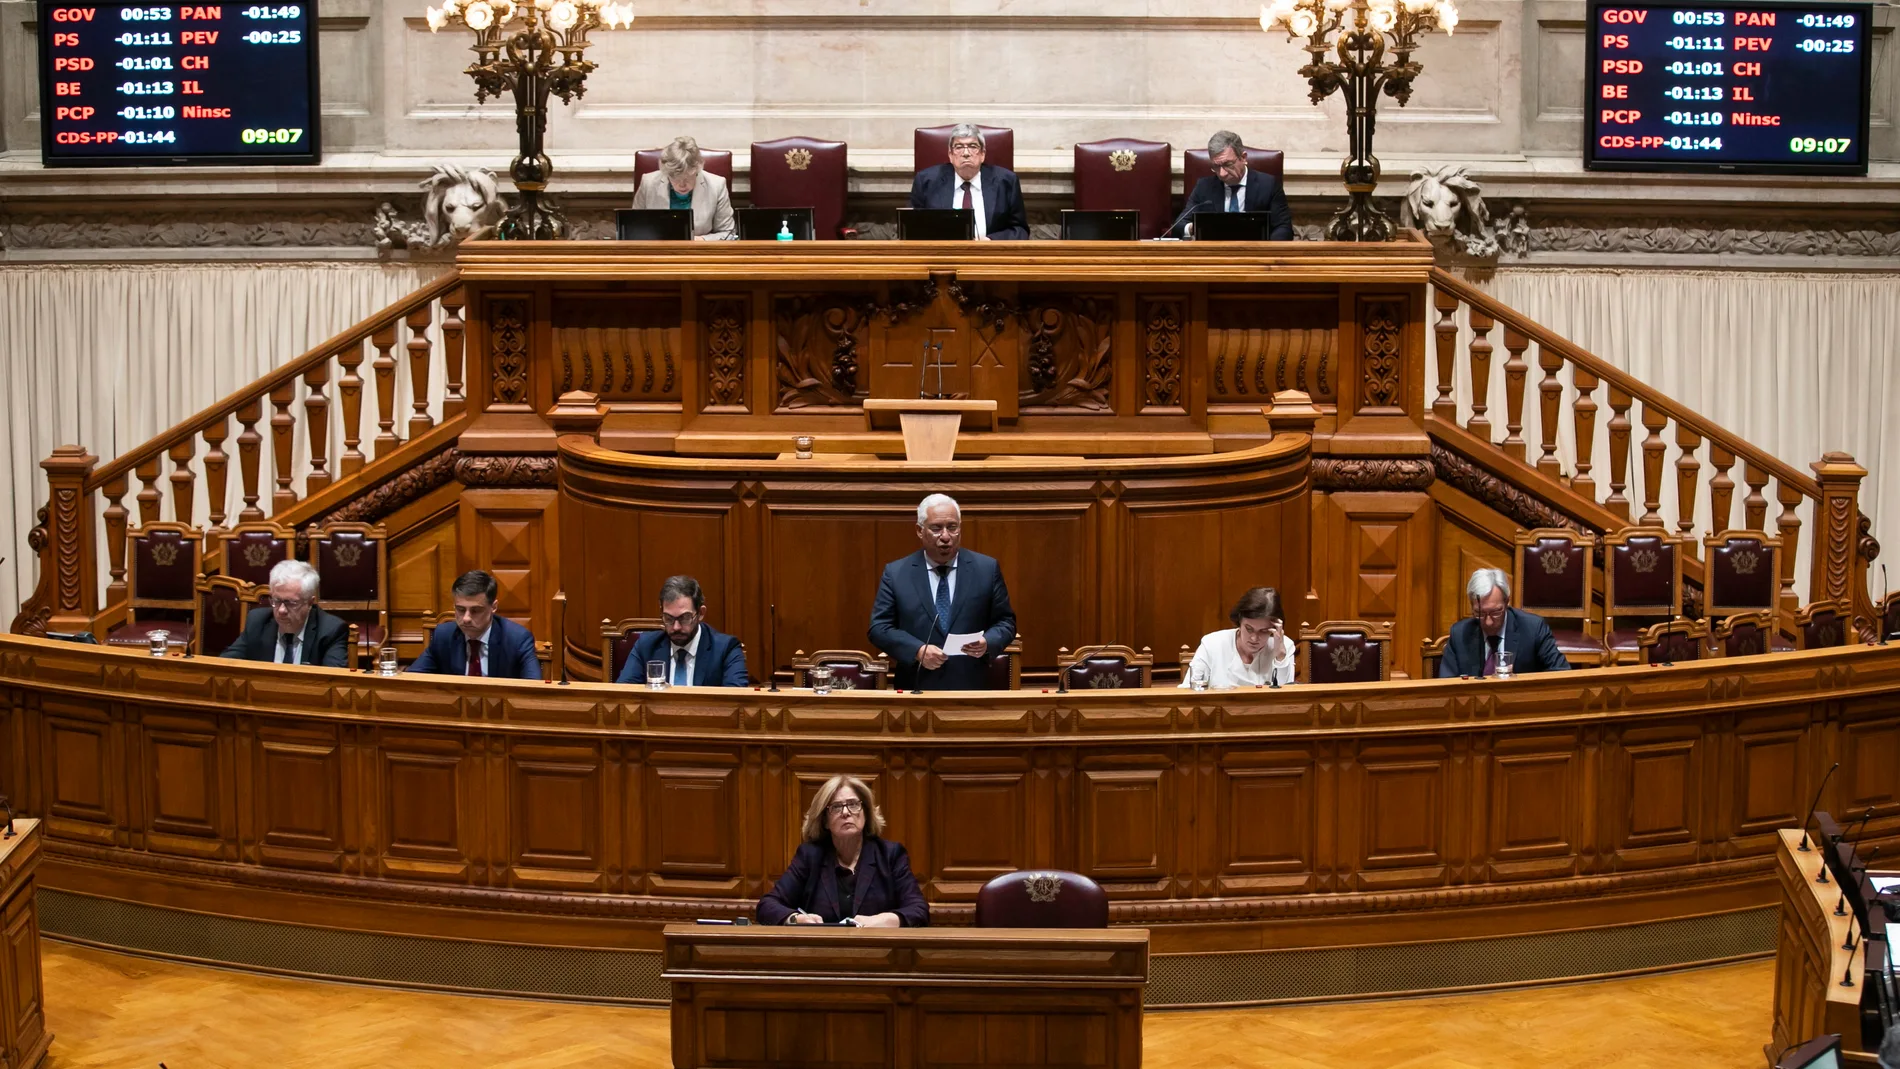 Portuguese parliament debates approval of state of emergency declaration amid coronavirus crisis